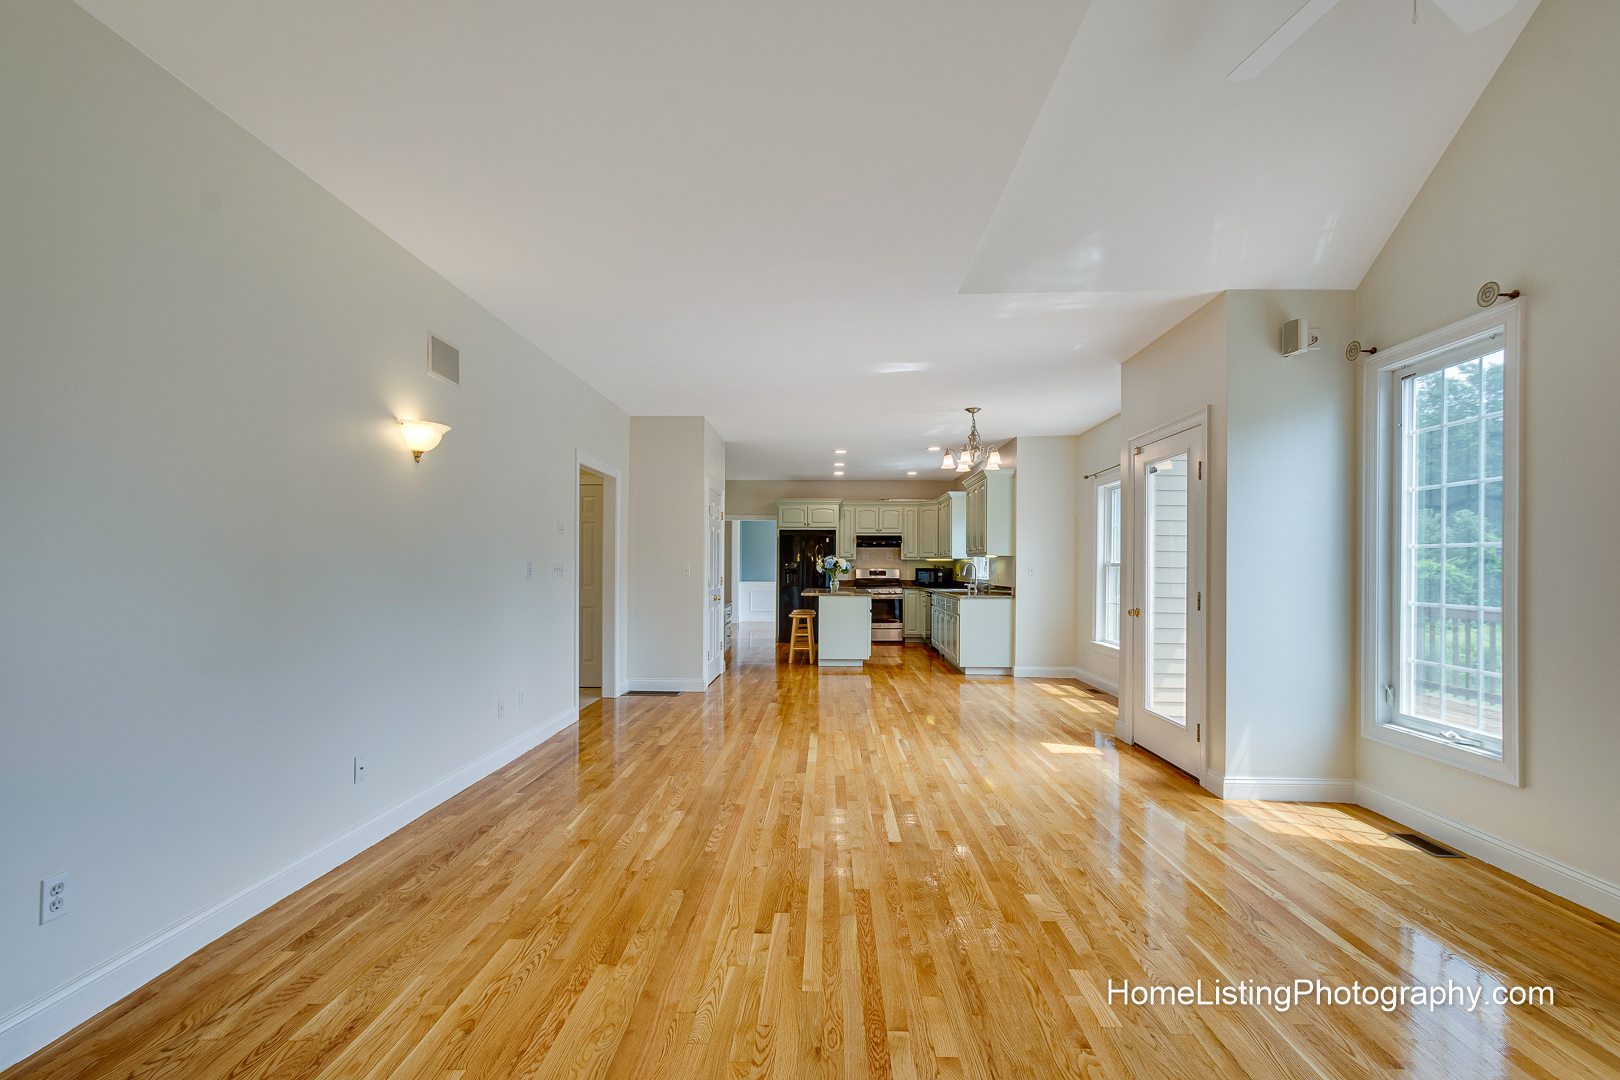 Thomas Adach -Northborough MA professional real estate photographer - 508-655-2225 Home Listing Photography